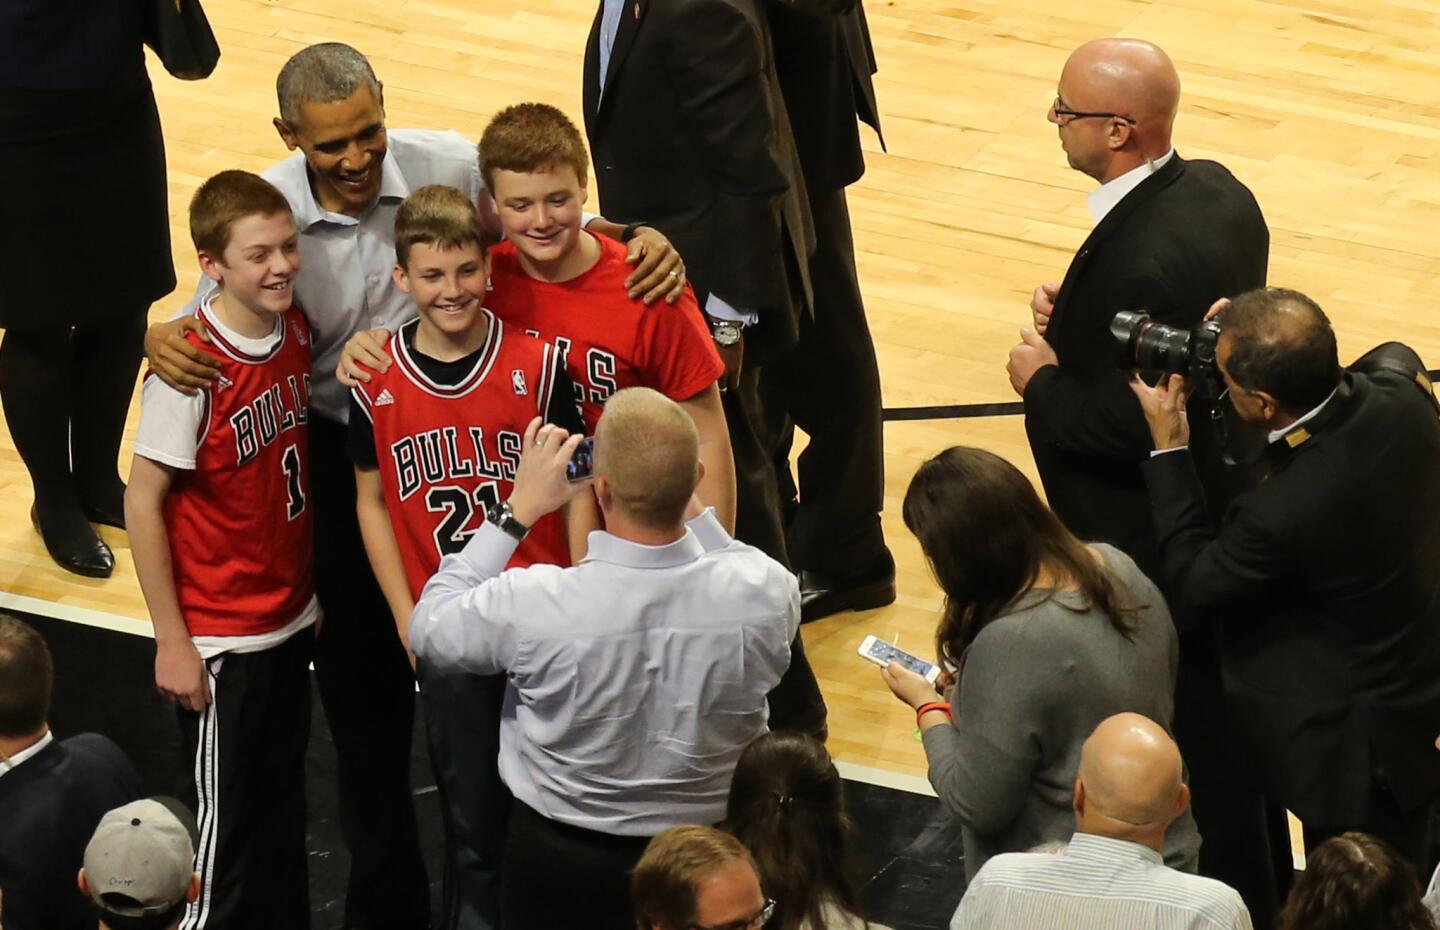 President Barack Obama poses for a photograph at a game between the Chicago Bulls and the Cleveland Cavaliers at the United Center in Chicago on Oct. 27, 2015.